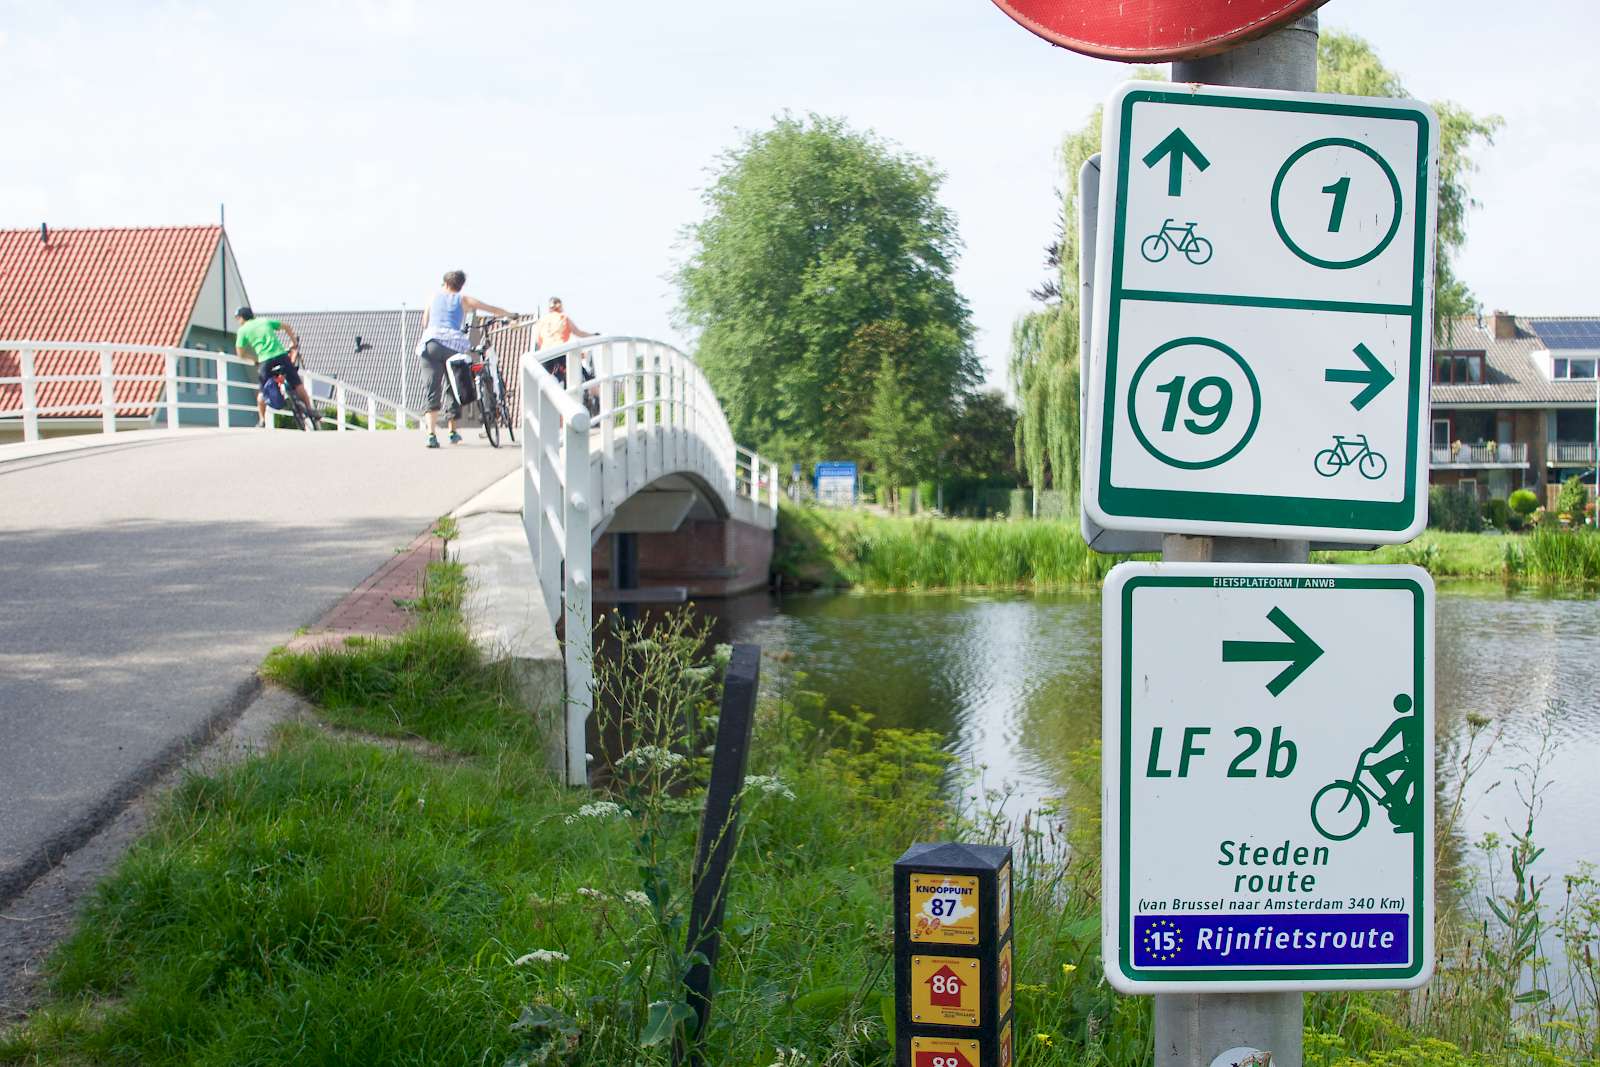 Wayfinding signs along the bike paths in Holland